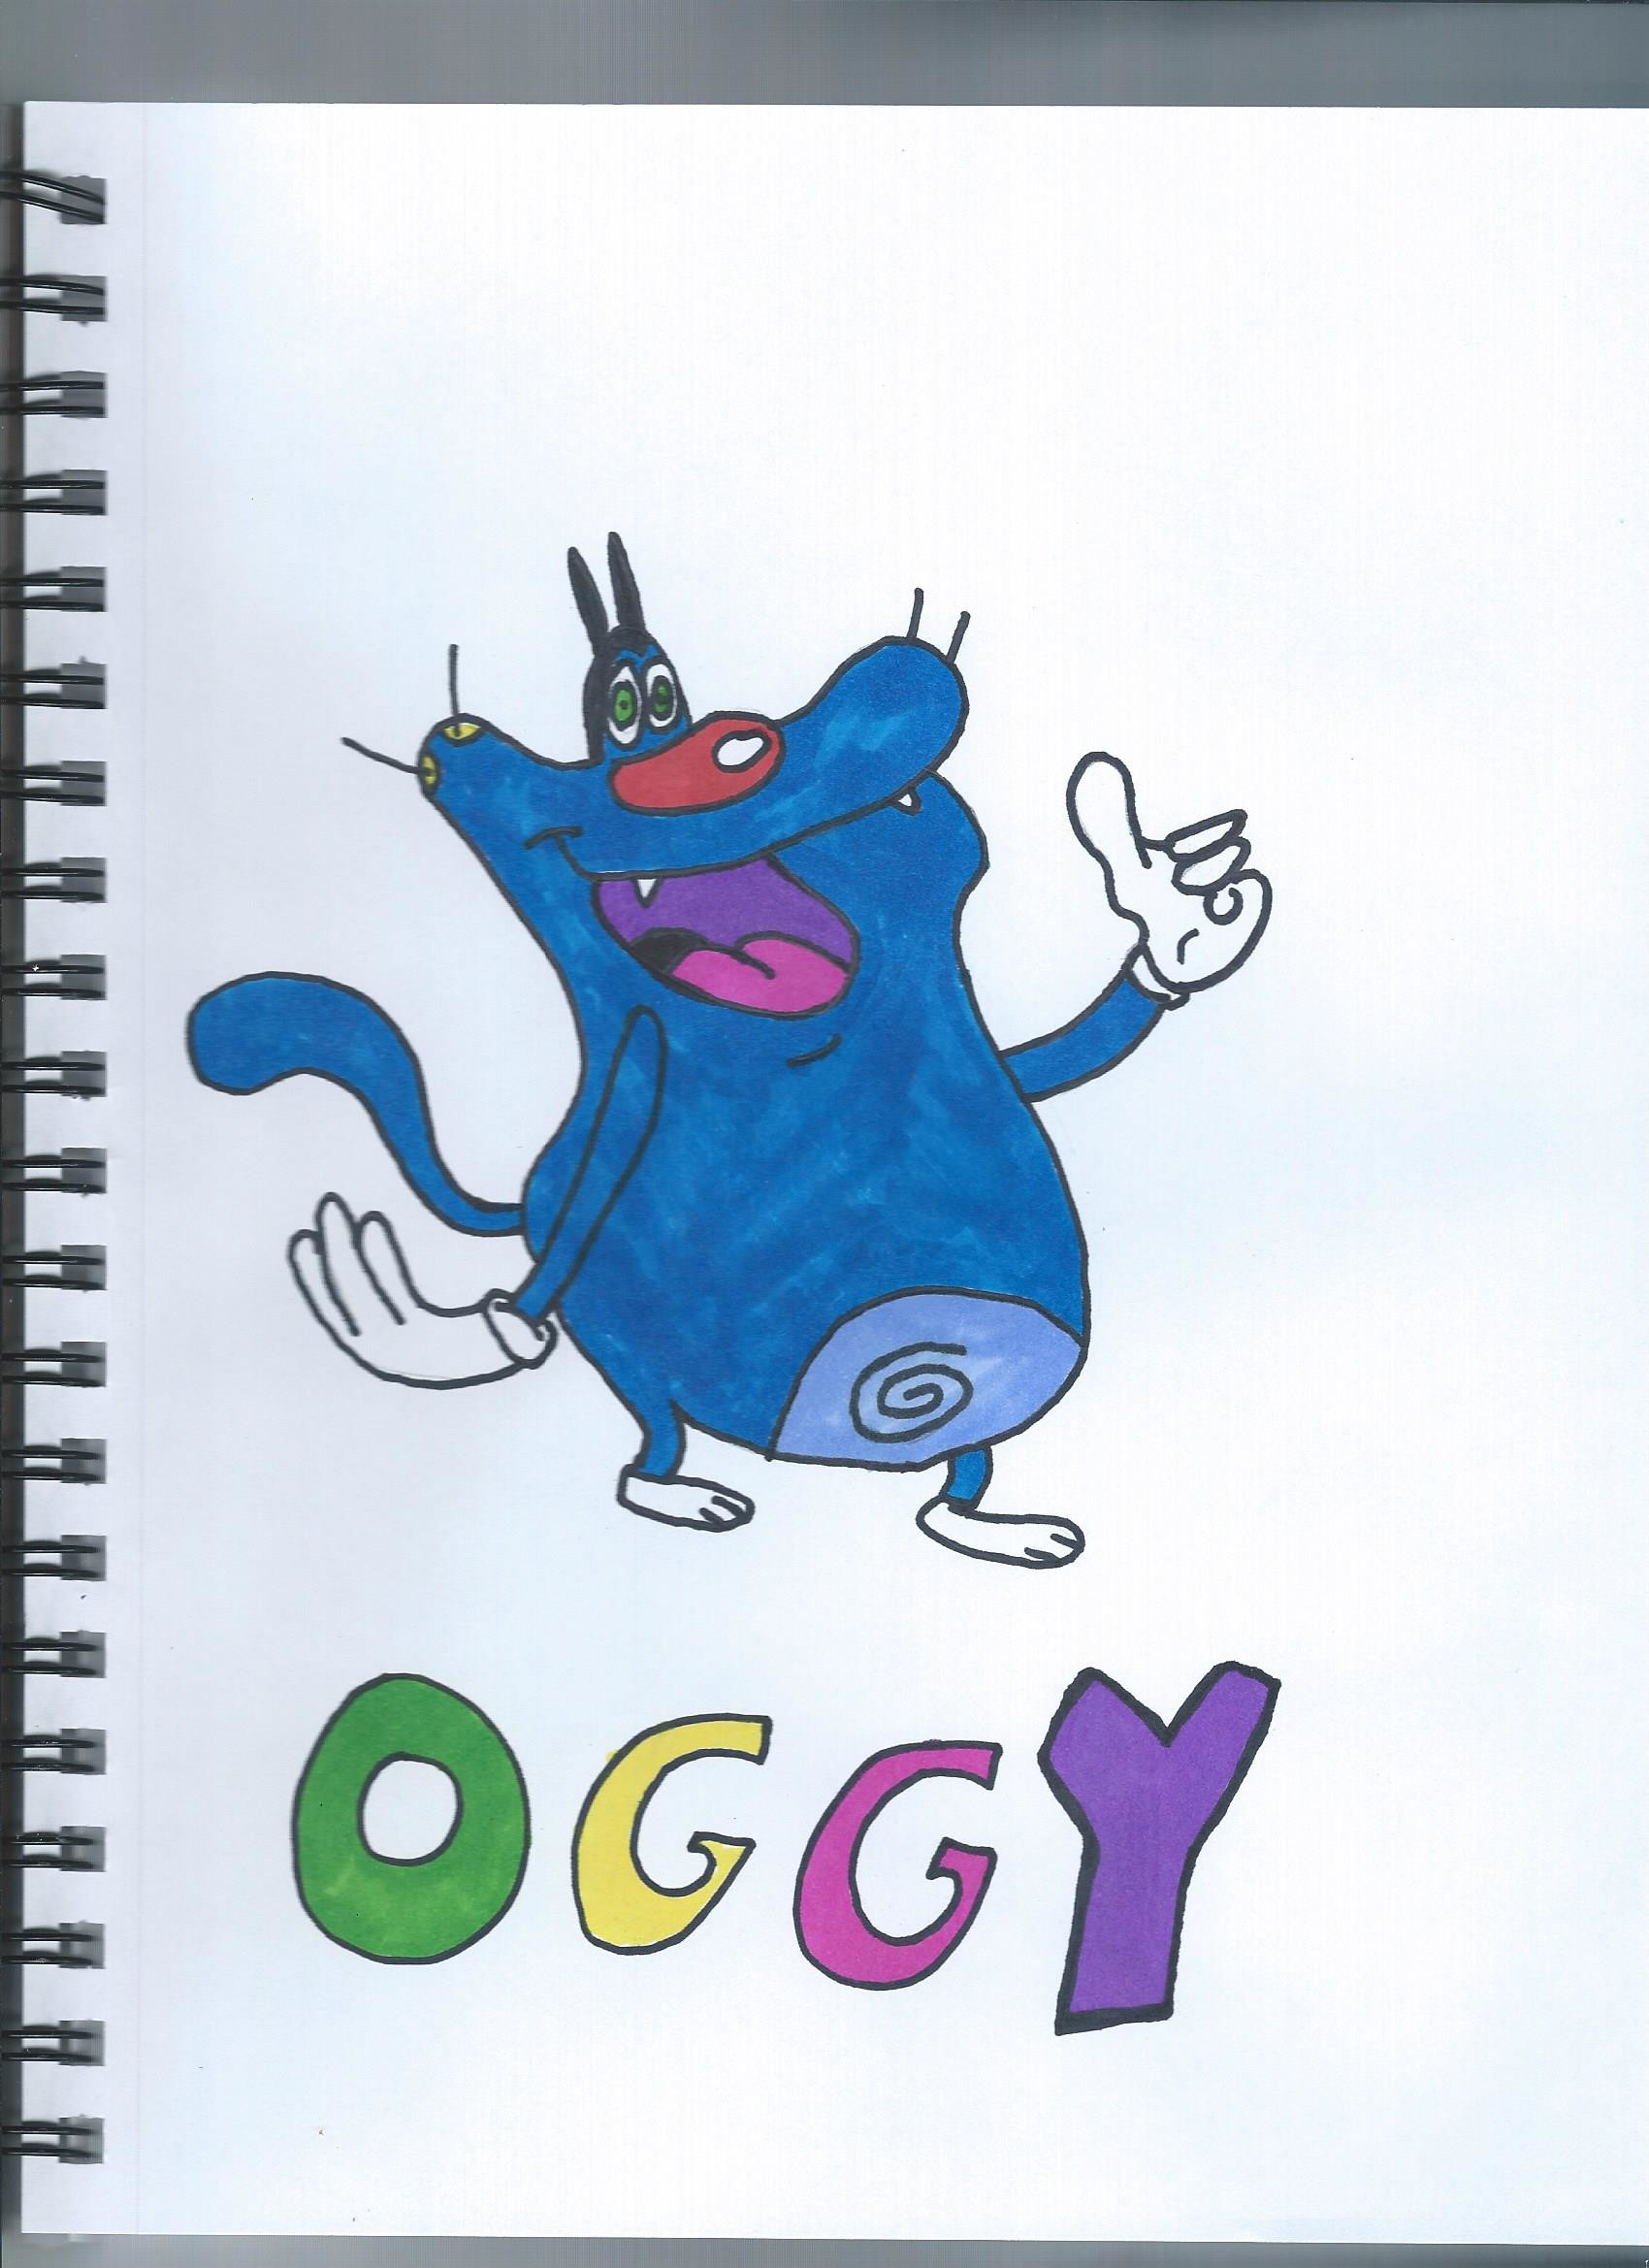 How to Draw Oggy.Step by step(easy draw) - YouTube